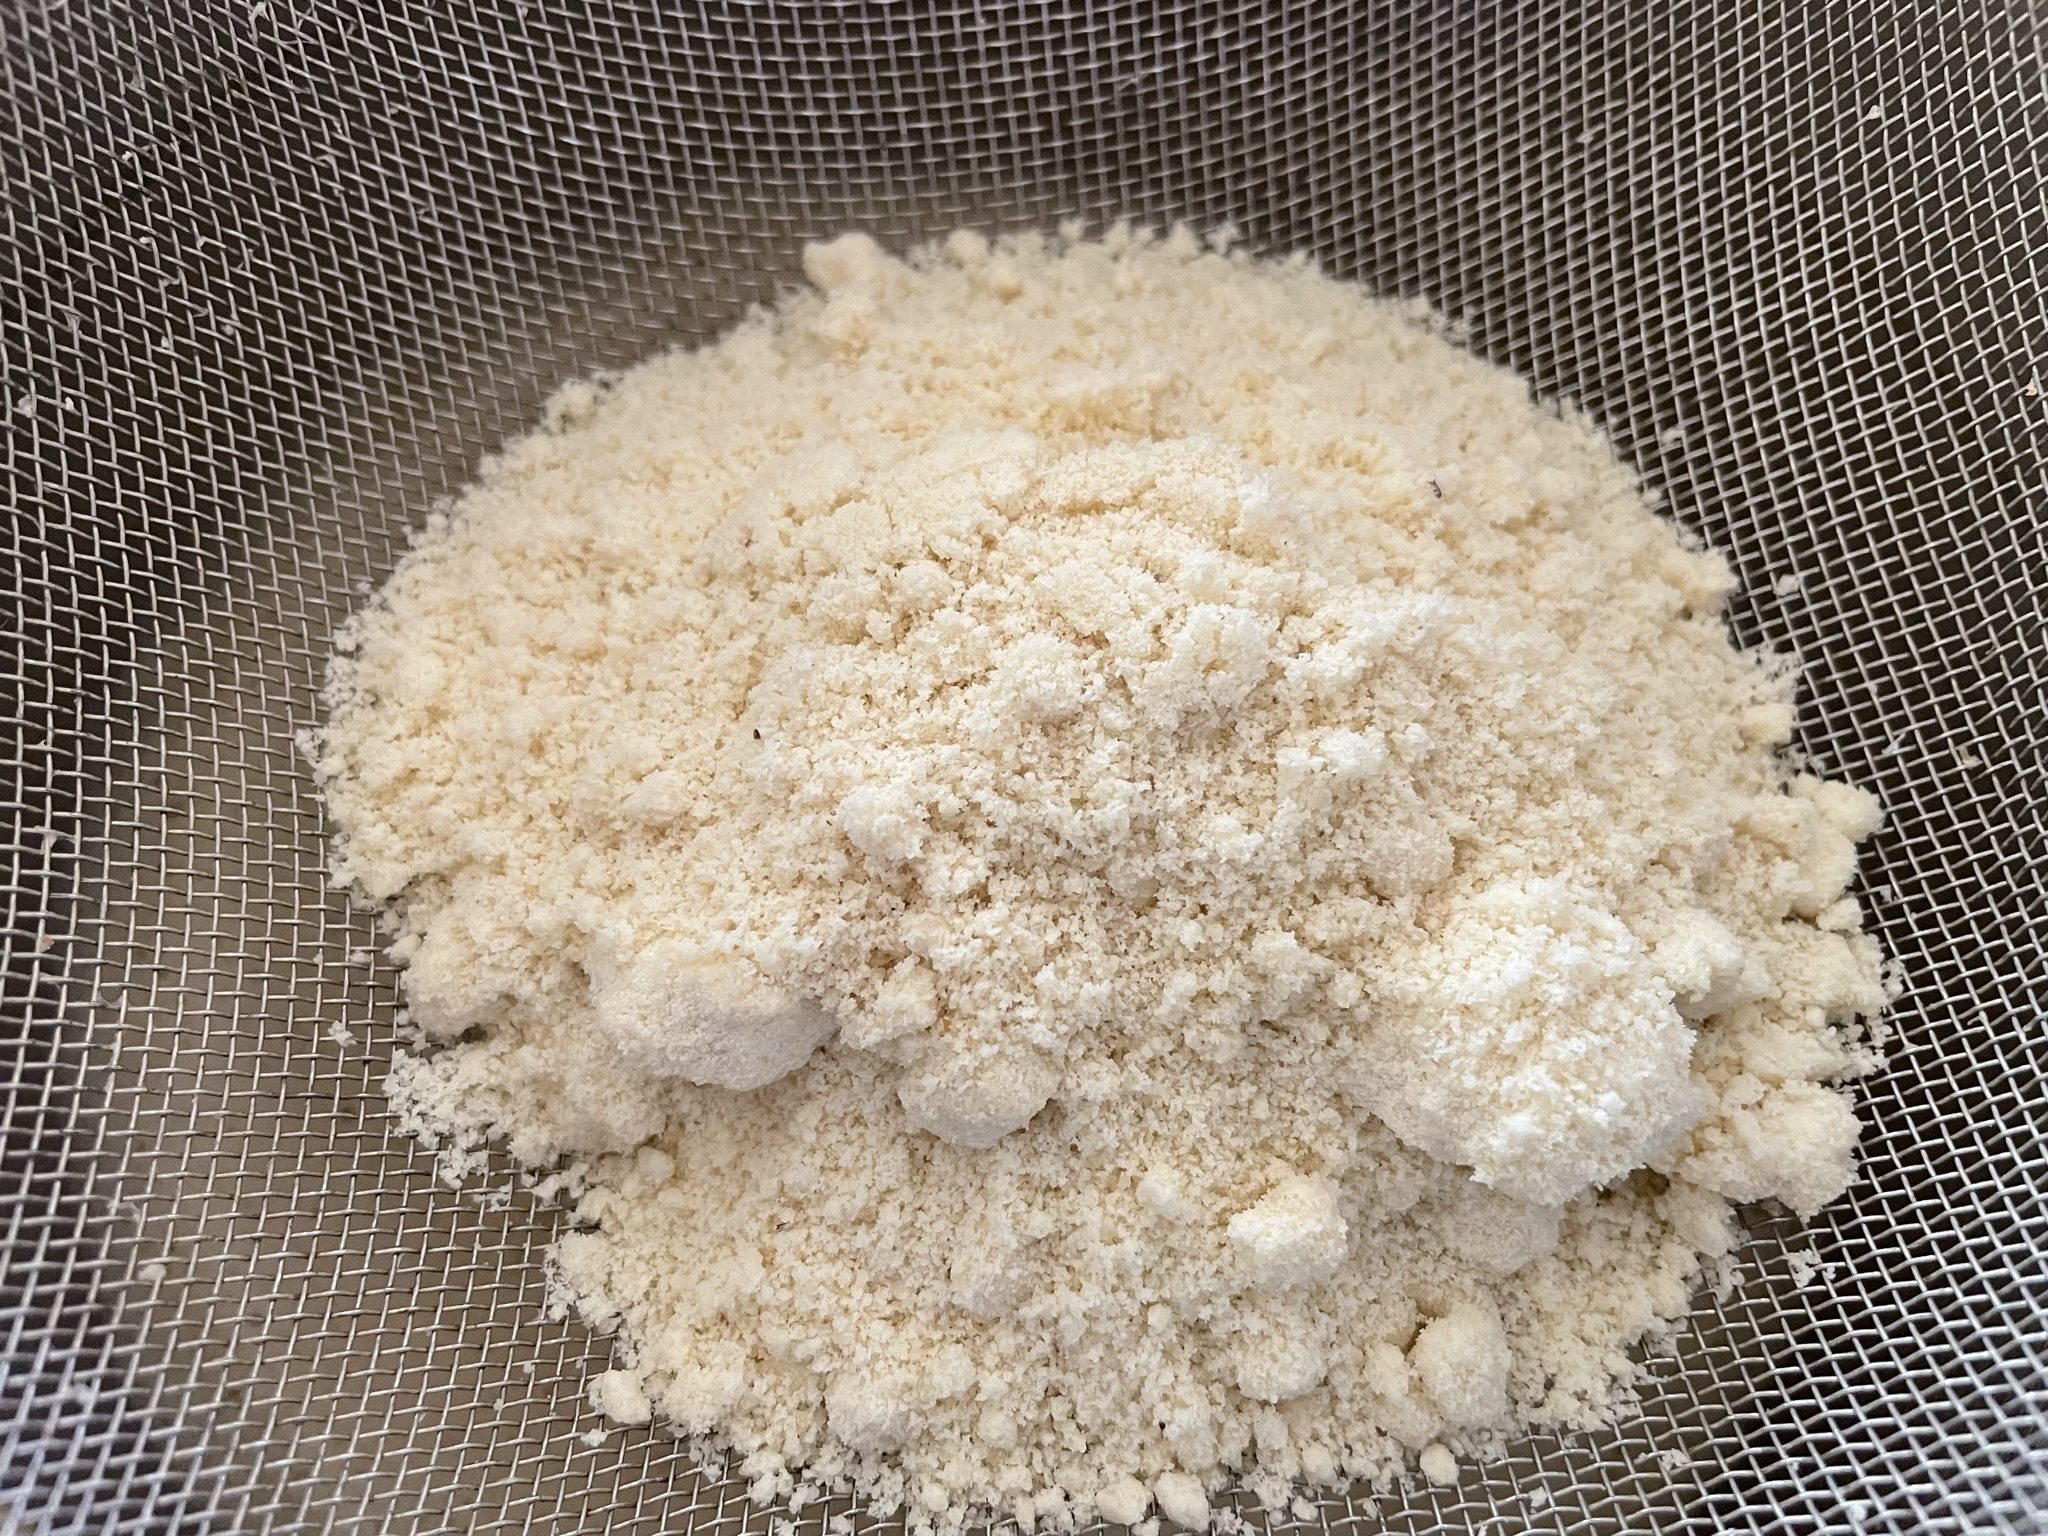 Sieve almond flour to prevent lumps in batter.